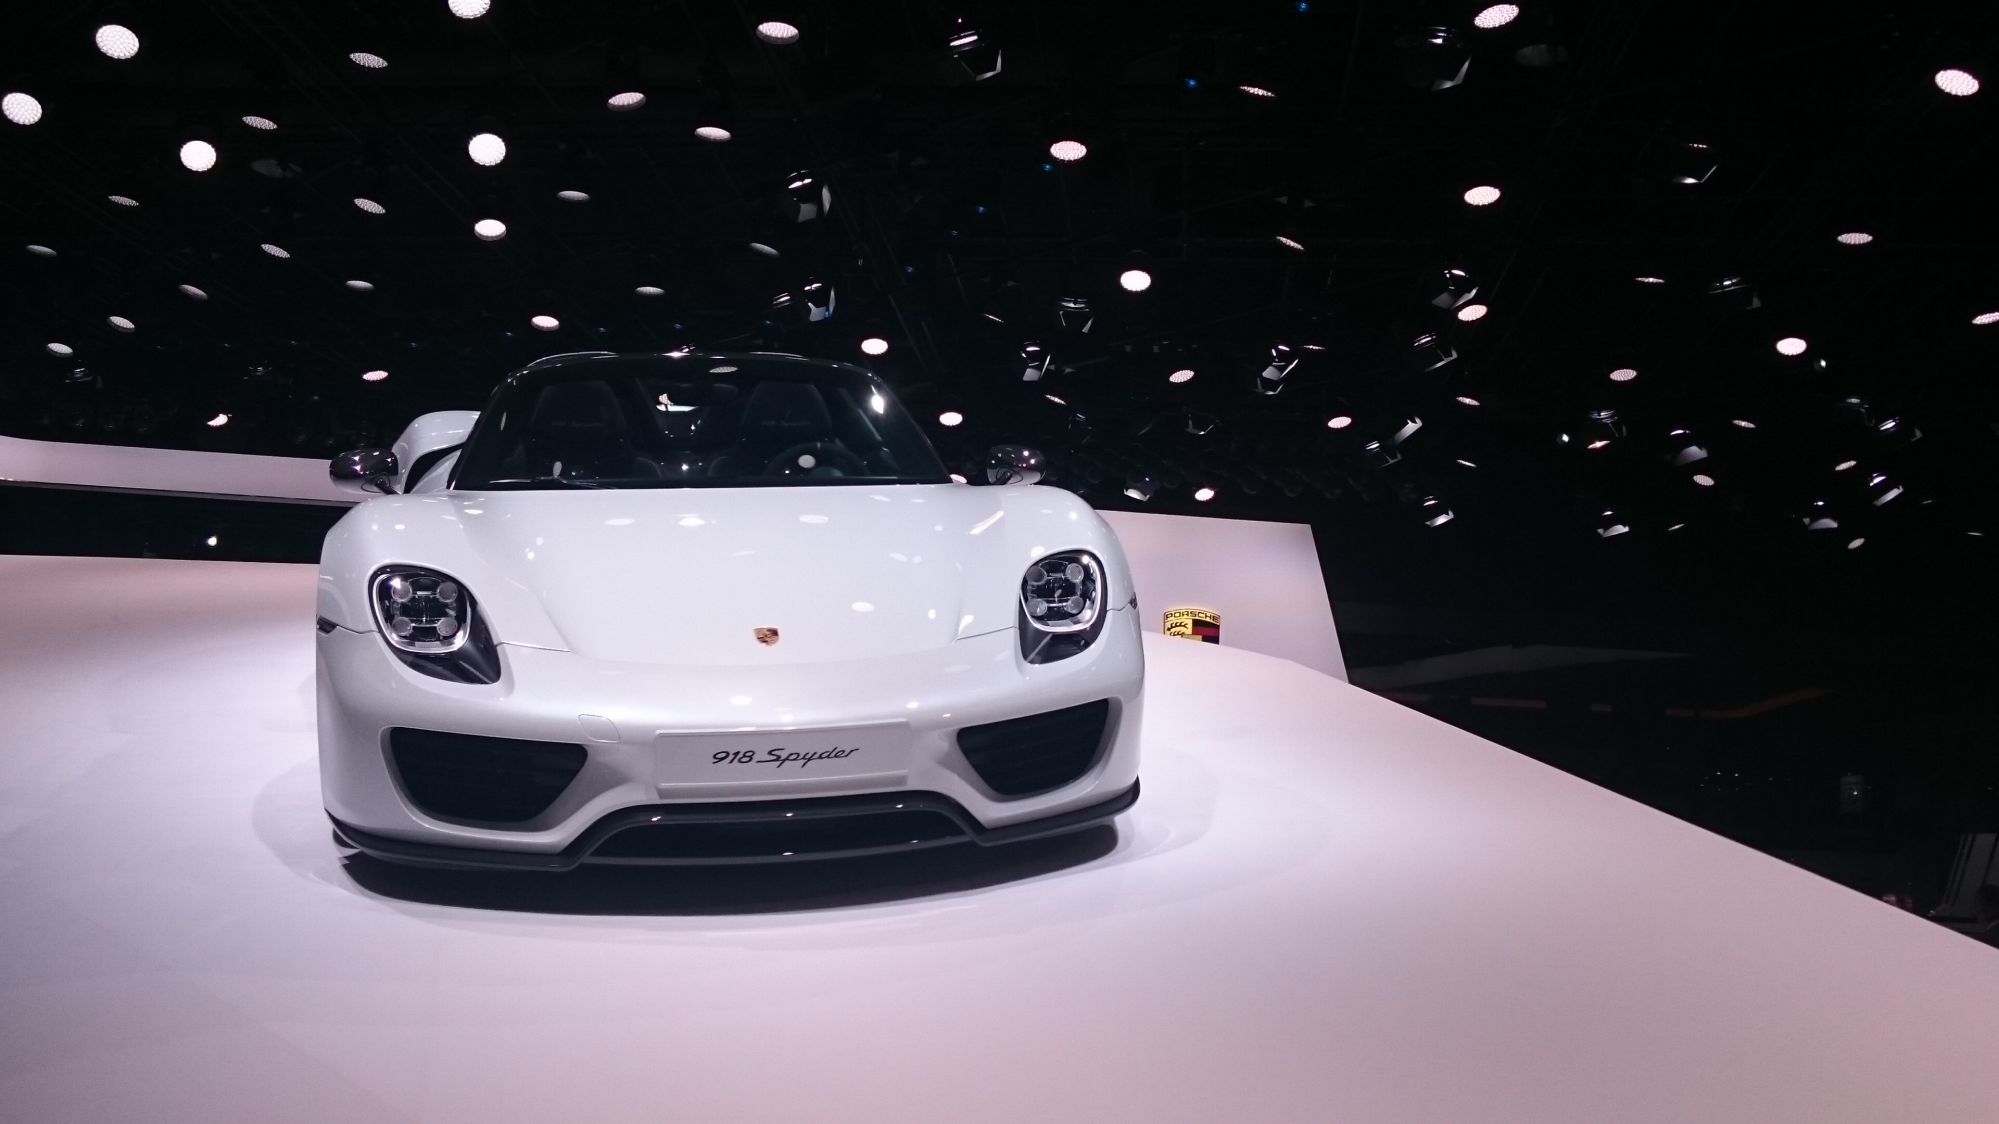 Pictures from the IAA in Frankfurt of the new Porsche